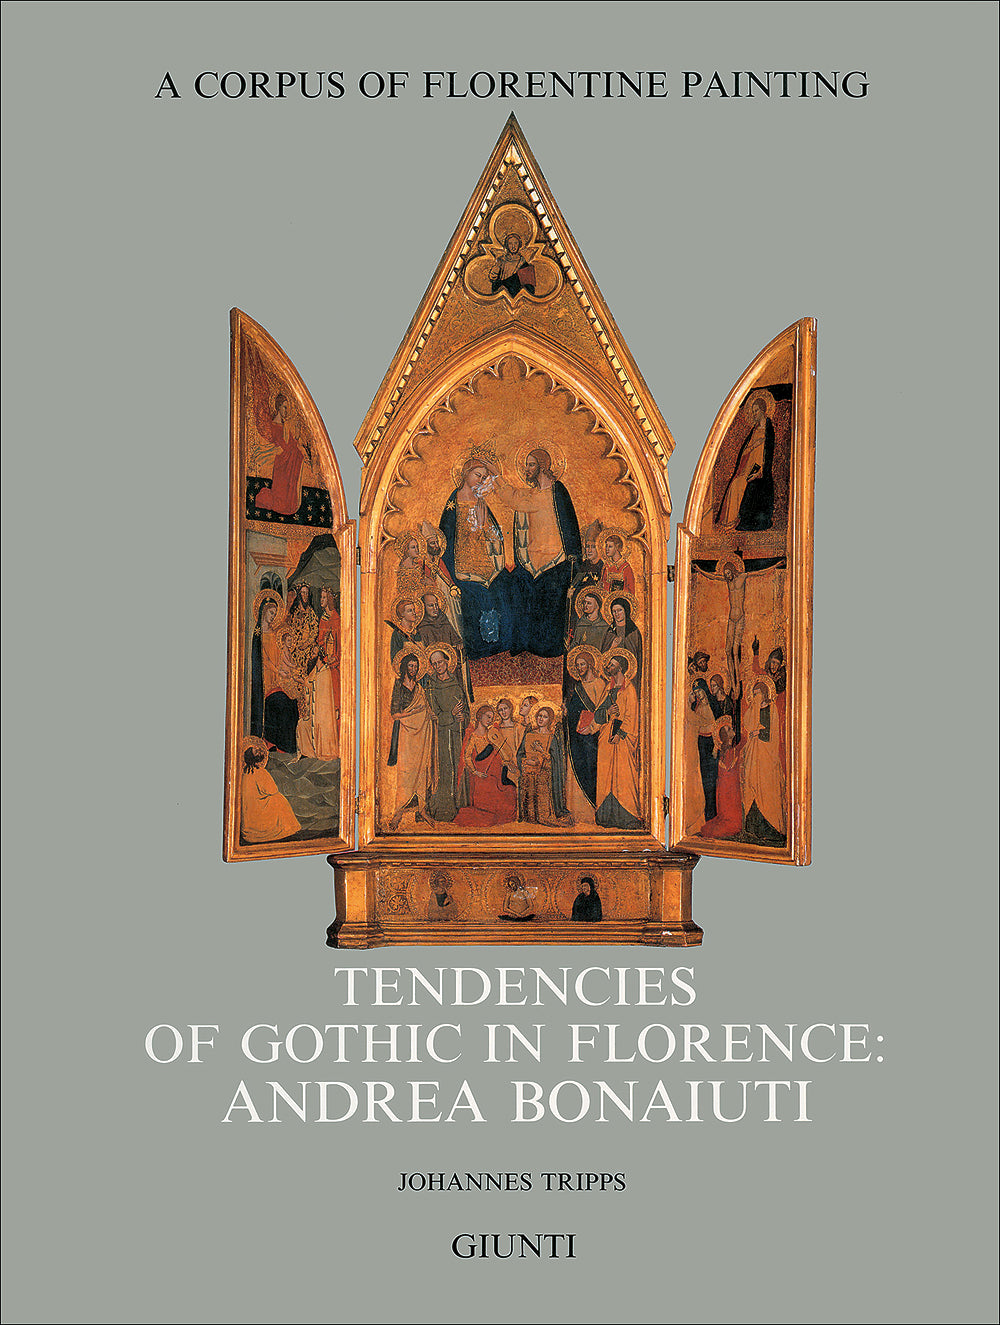 Tendencies of gothic in Florence: Andrea Bonaiuti (in inglese). Section IV, volume VII (partI)